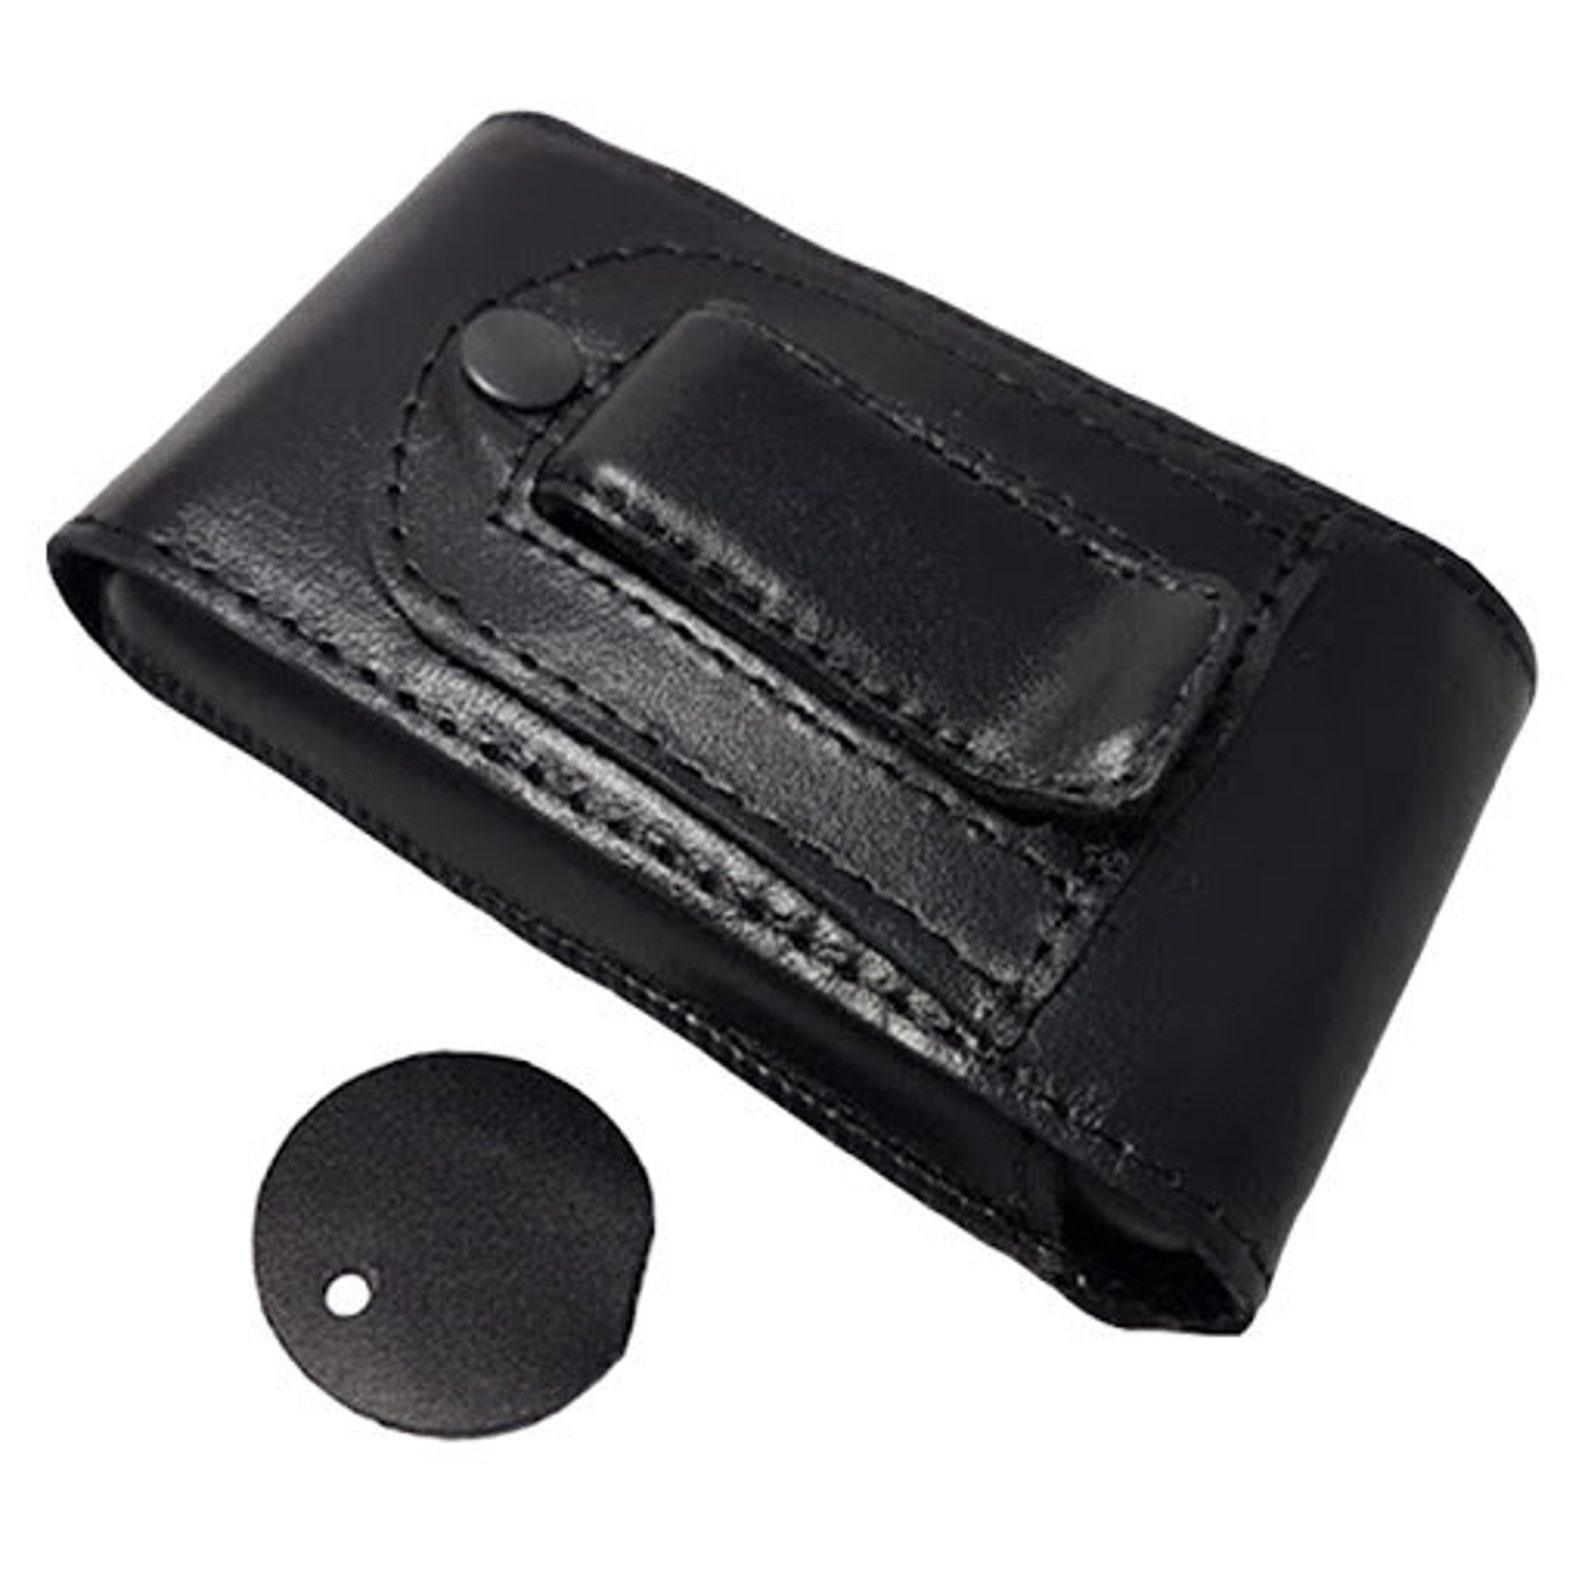 Dexcom G6 Receiver Touchscreen Genuine Leather Case With Clip Black - Etsy